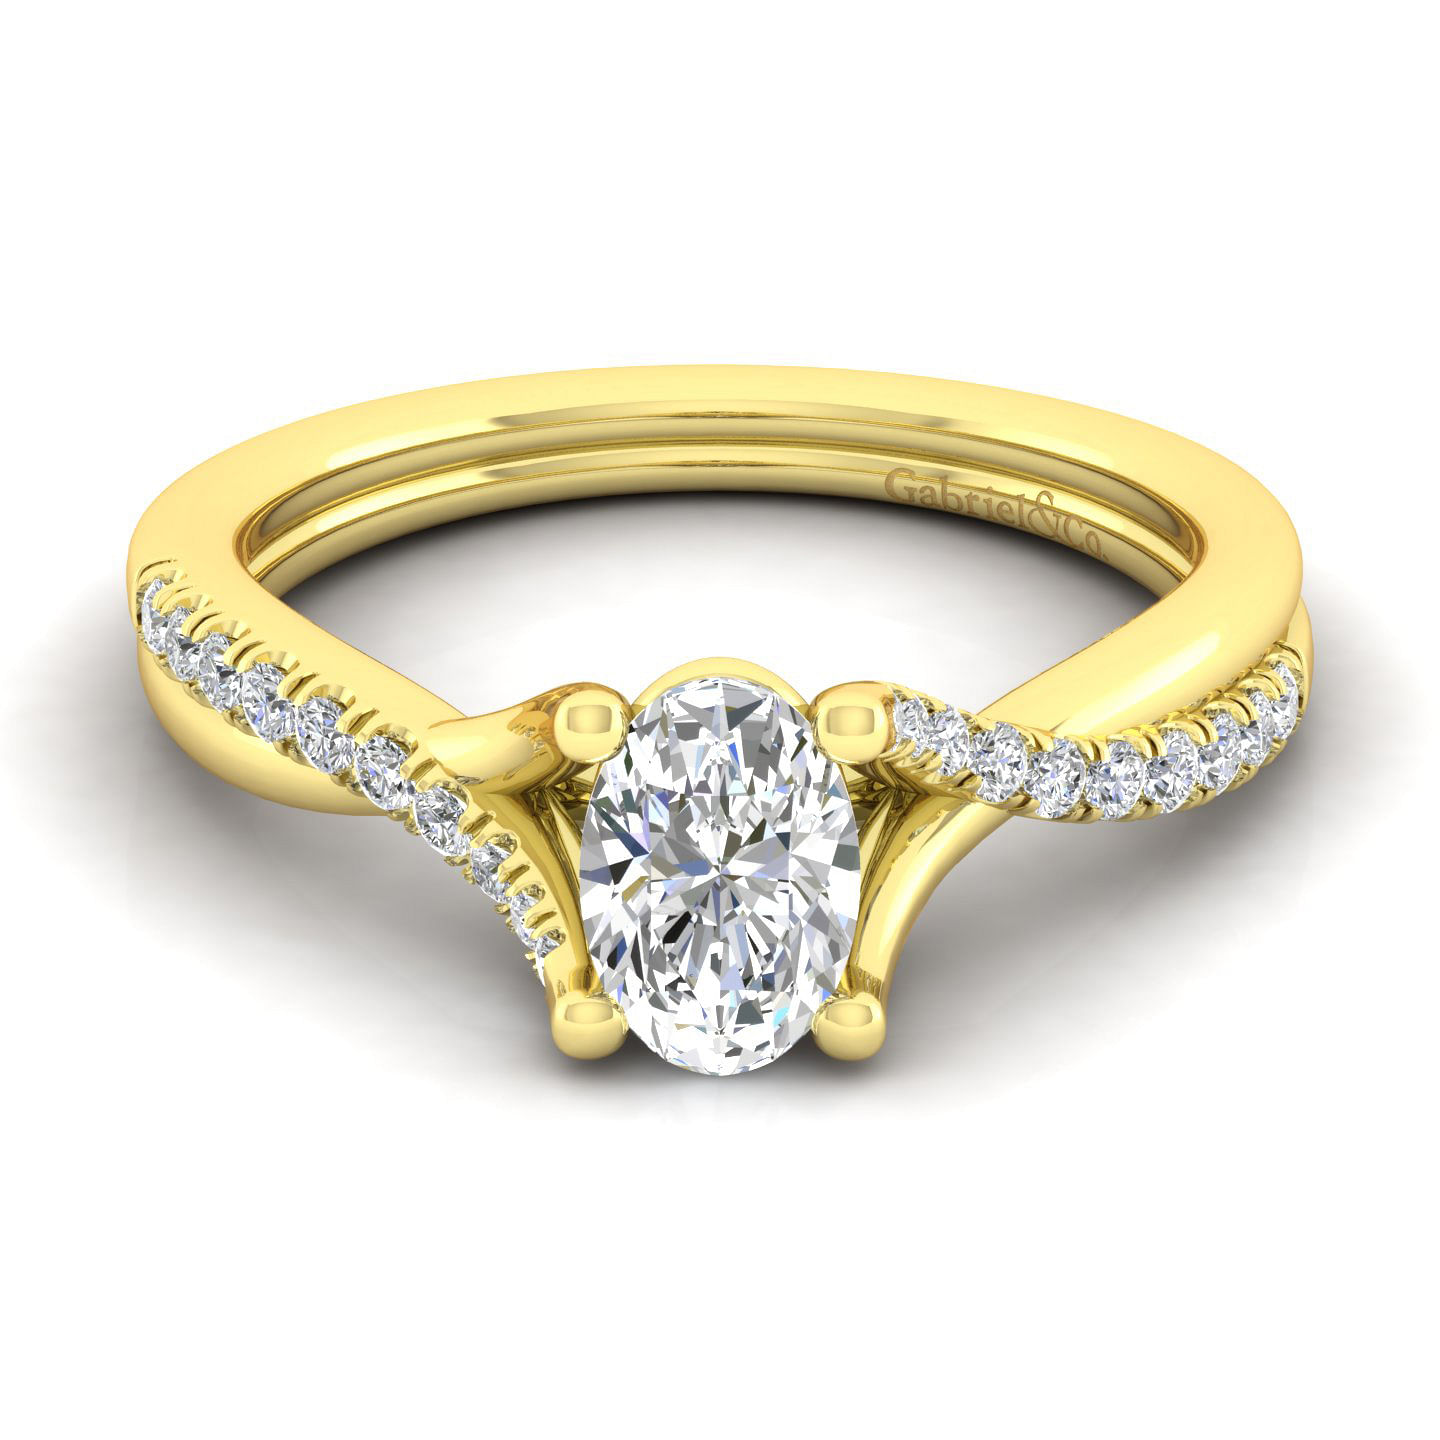 Leigh - 14K Yellow Gold Oval Diamond Engagement Ring